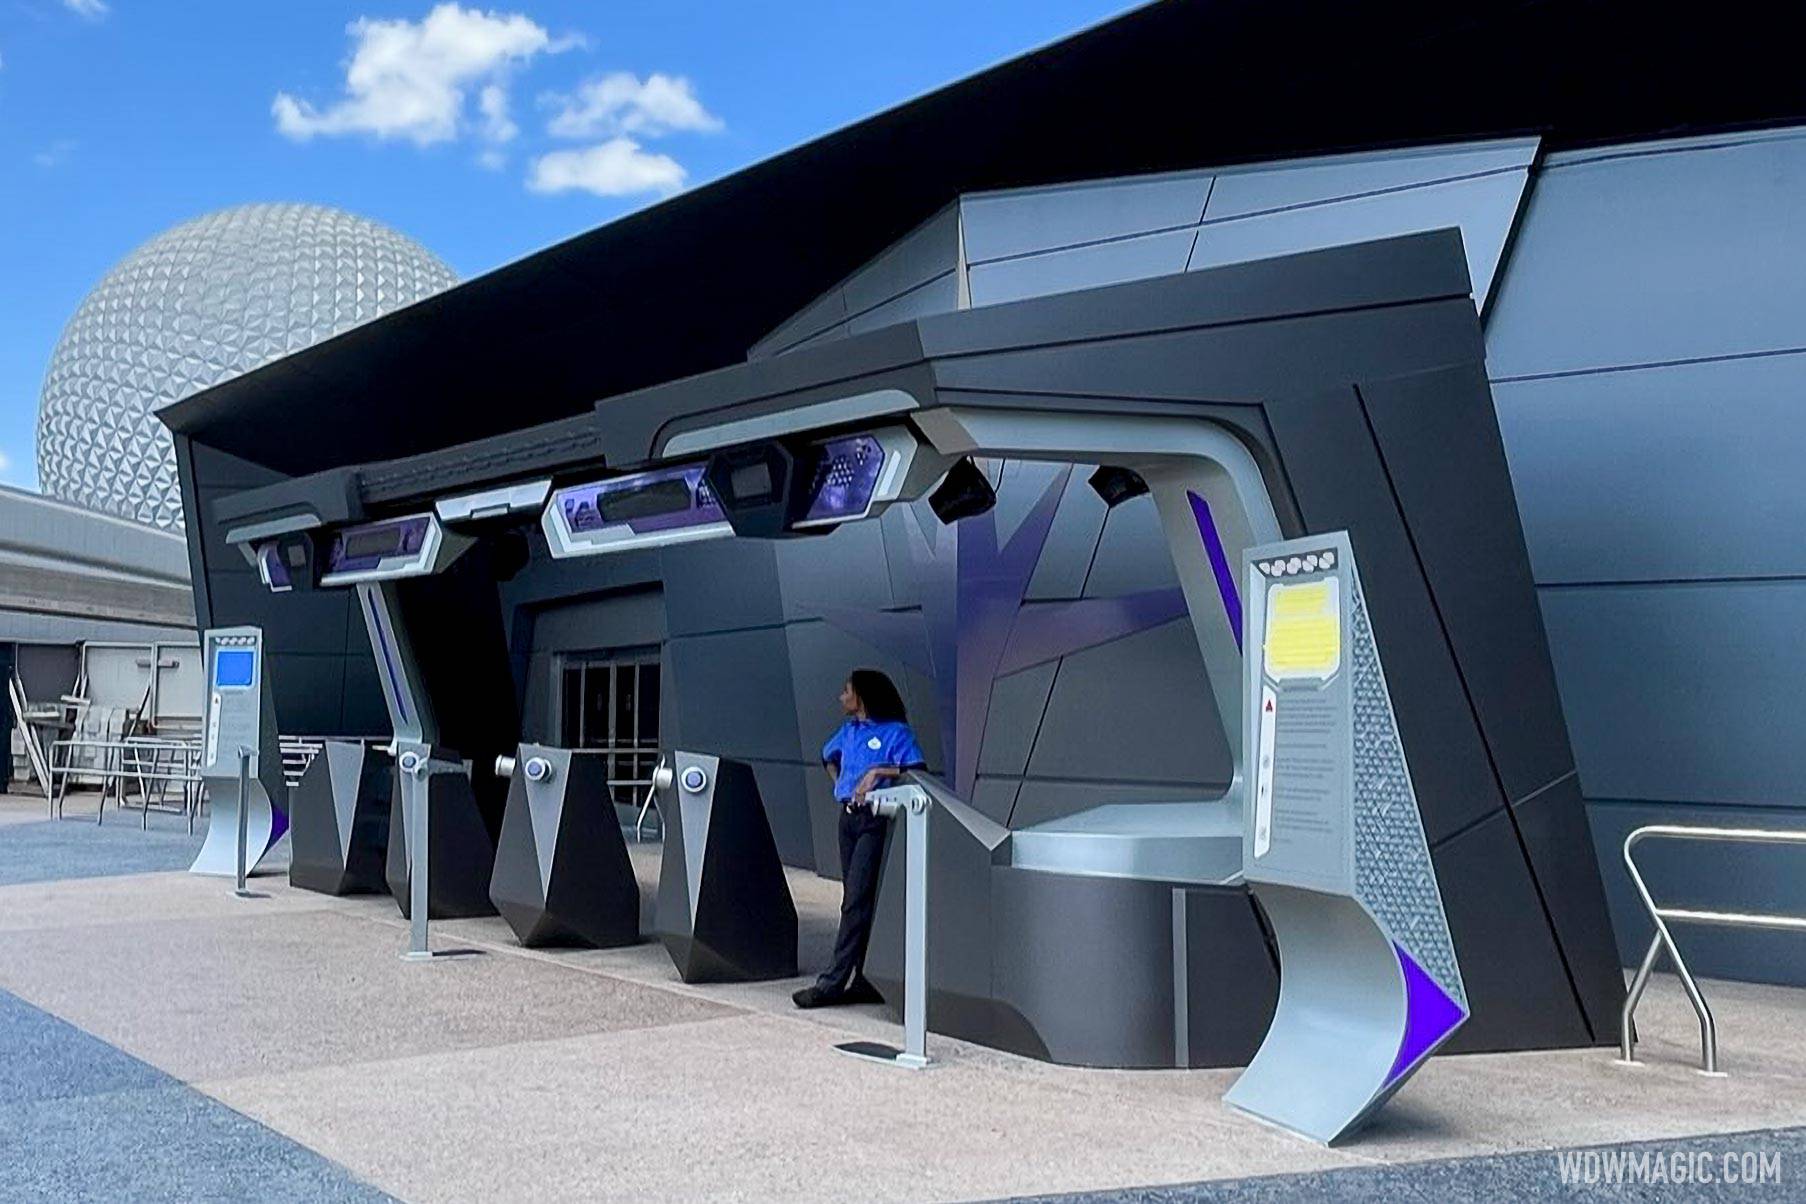 The Lightning Lane and Virtual Queue entrance at the Wonders of Xandar pavilion